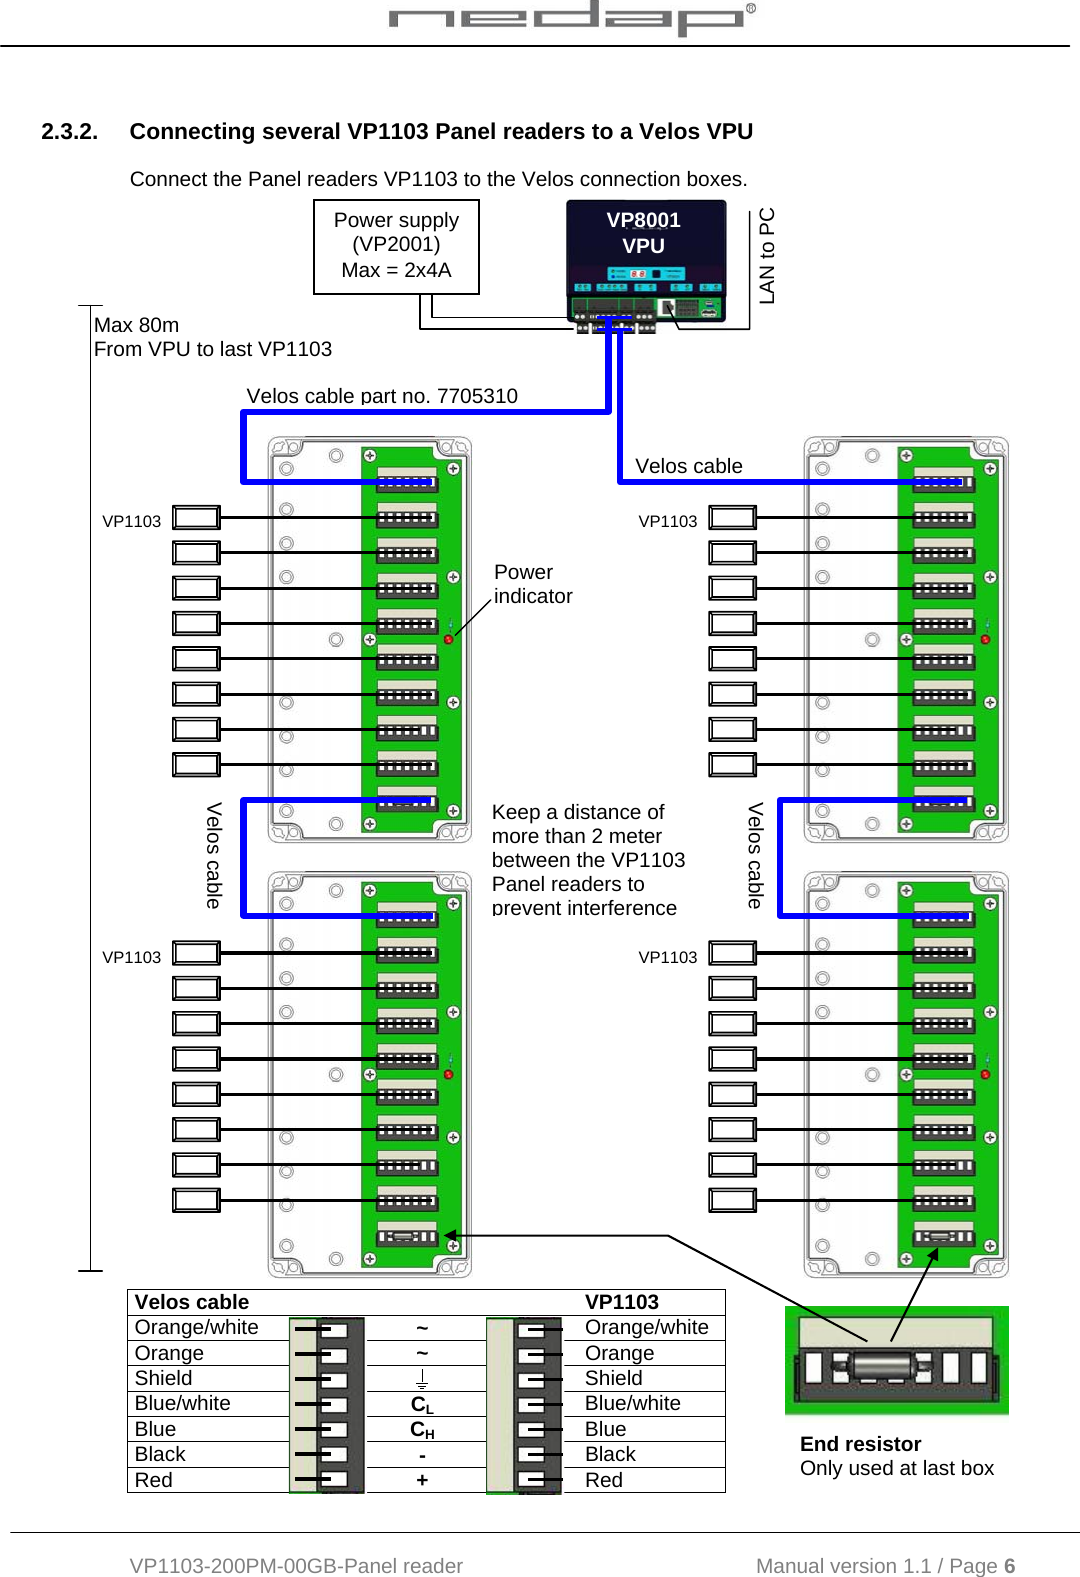  VP1103-200PM-00GB-Panel reader                                           Manual version 1.1 / Page 6  2.3.2.  Connecting several VP1103 Panel readers to a Velos VPU Connect the Panel readers VP1103 to the Velos connection boxes.   VP1103VP1103VP1103 VP1103 VP8001 VPUMax 80m From VPU to last VP1103 Velos cable part no. 7705310End resistor Only used at last box  Velos cable Velos cable Velos cablePower indicator Velos cable        VP1103 Orange/white   ~   Orange/white Orange   ~   Orange Shield     Shield Blue/white   CL  Blue/white Blue   CH  Blue Black   -   Black Red   +   Red Power supply (VP2001) Max = 2x4A LAN to PC Keep a distance of more than 2 meter between the VP1103 Panel readers to prevent interference